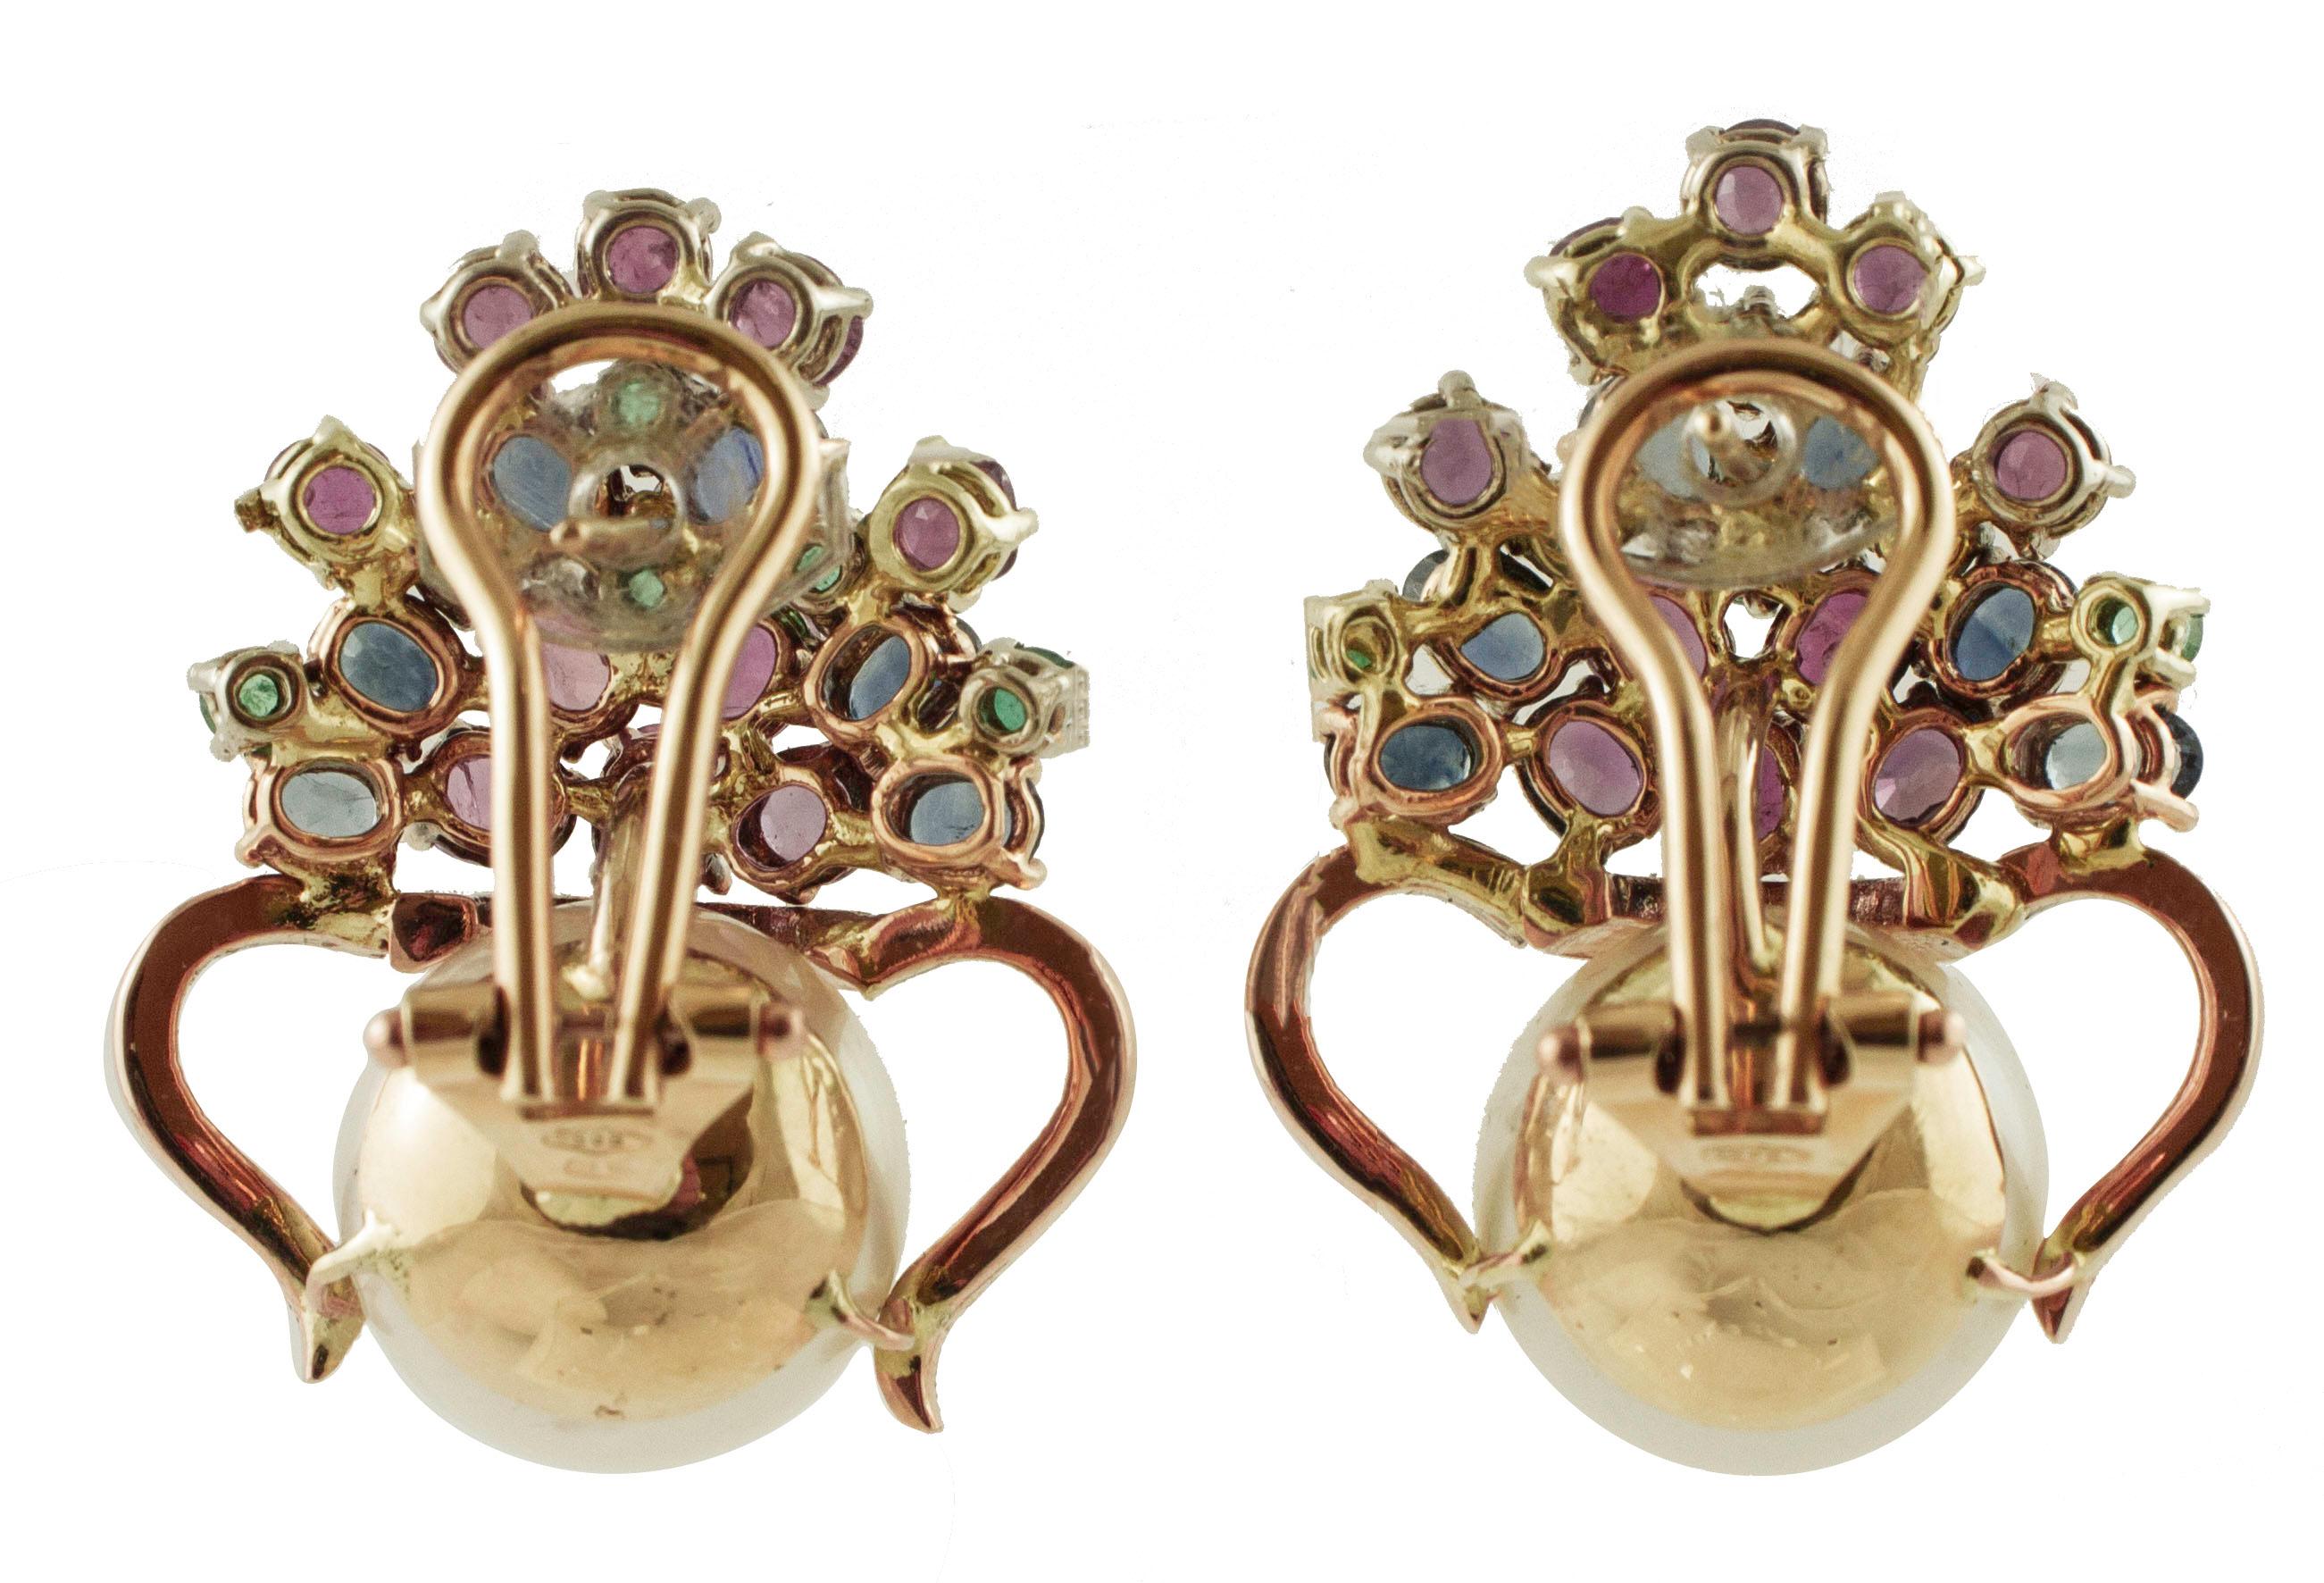 Unique fashion design clip-on earrings with planter shape in 14K rose gold structure mounted at the top with 8.29 ct of rubies, emeralds and blue sapphires that representing the flowers into the pot and at the bottom there are 6.60 g of white pearls